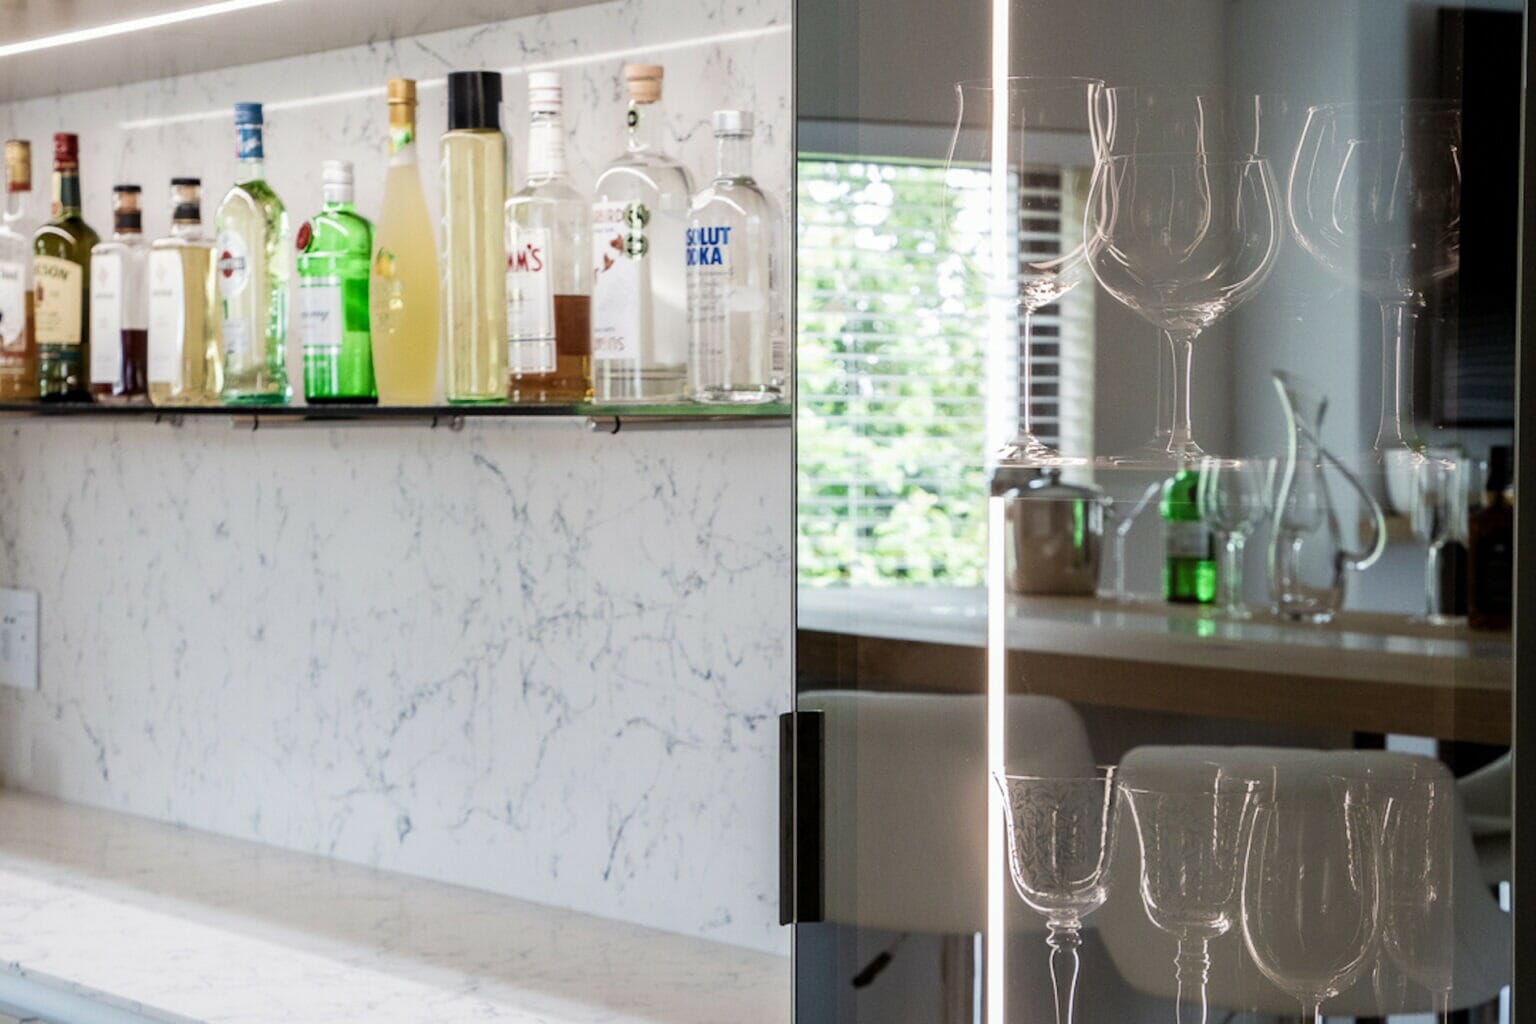 Marble inlay in the wooden bar counter to match the bar’s countertops and splashbacks